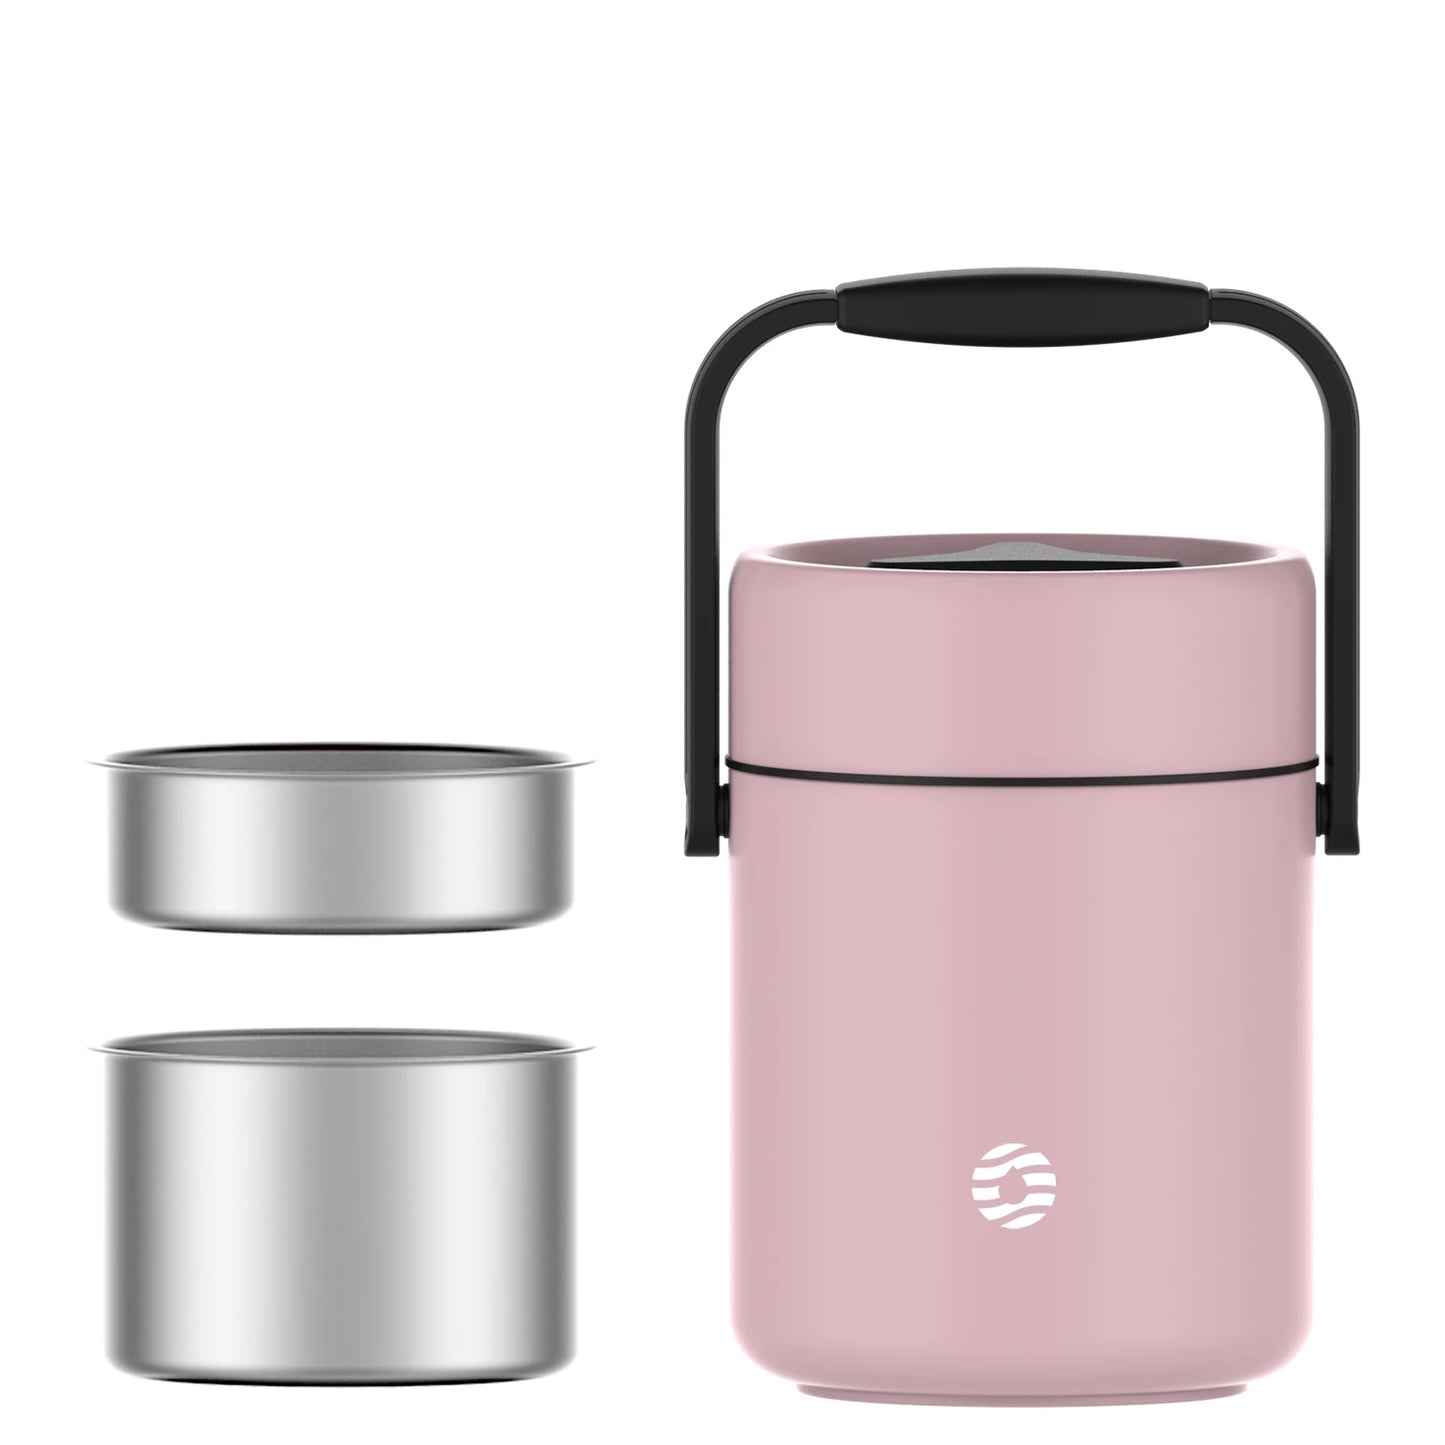 FEIJIAN-Stainless Steel Lunch Box, 3 Layers Food Jars, 1600ml, 54oz Pink 3 1600ml